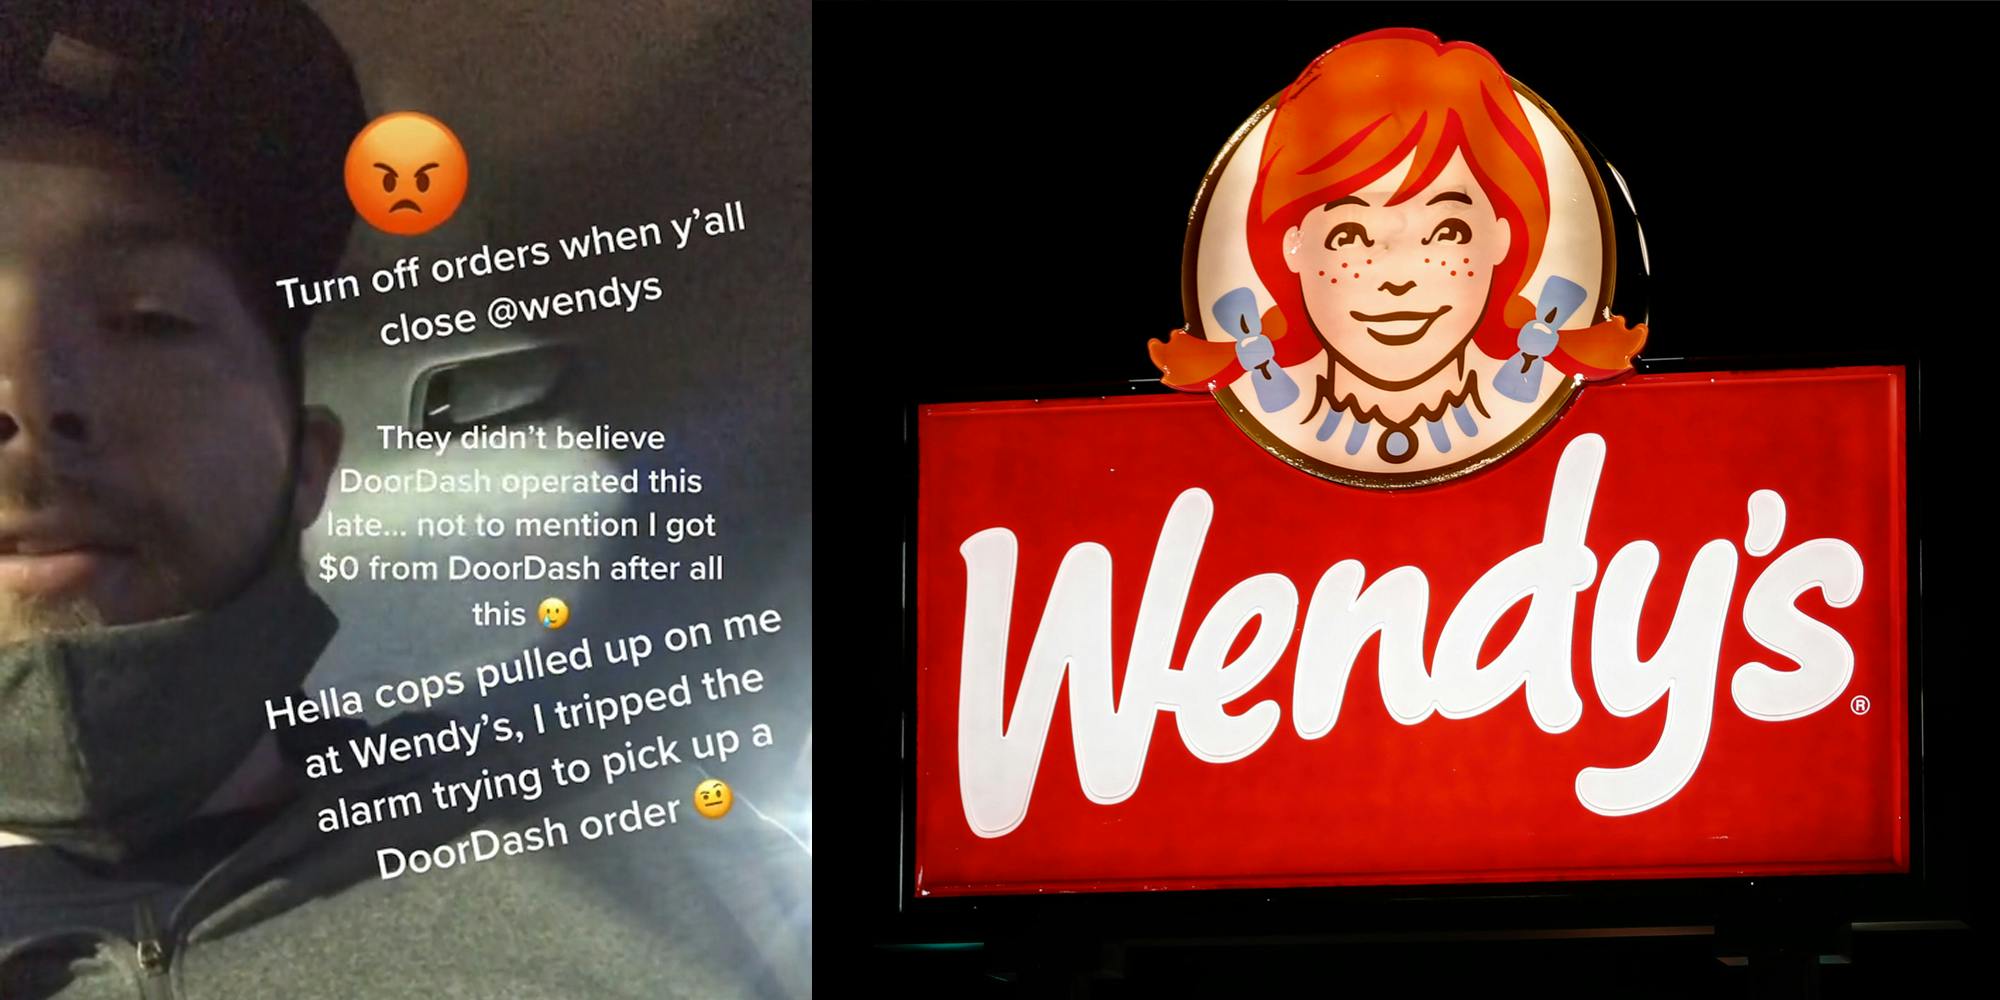 man in driver's seat with lights in rear window with caption "turn off orders when y'all close @wendys - they didn't believe DoorDash operated this late... not to mention I got $0 from DoorDash after all this - Hella cops pulled up on me at Wendy's, I tripped the alarm trying to pick up a DoorDash order" (l) wendy's sign (r)